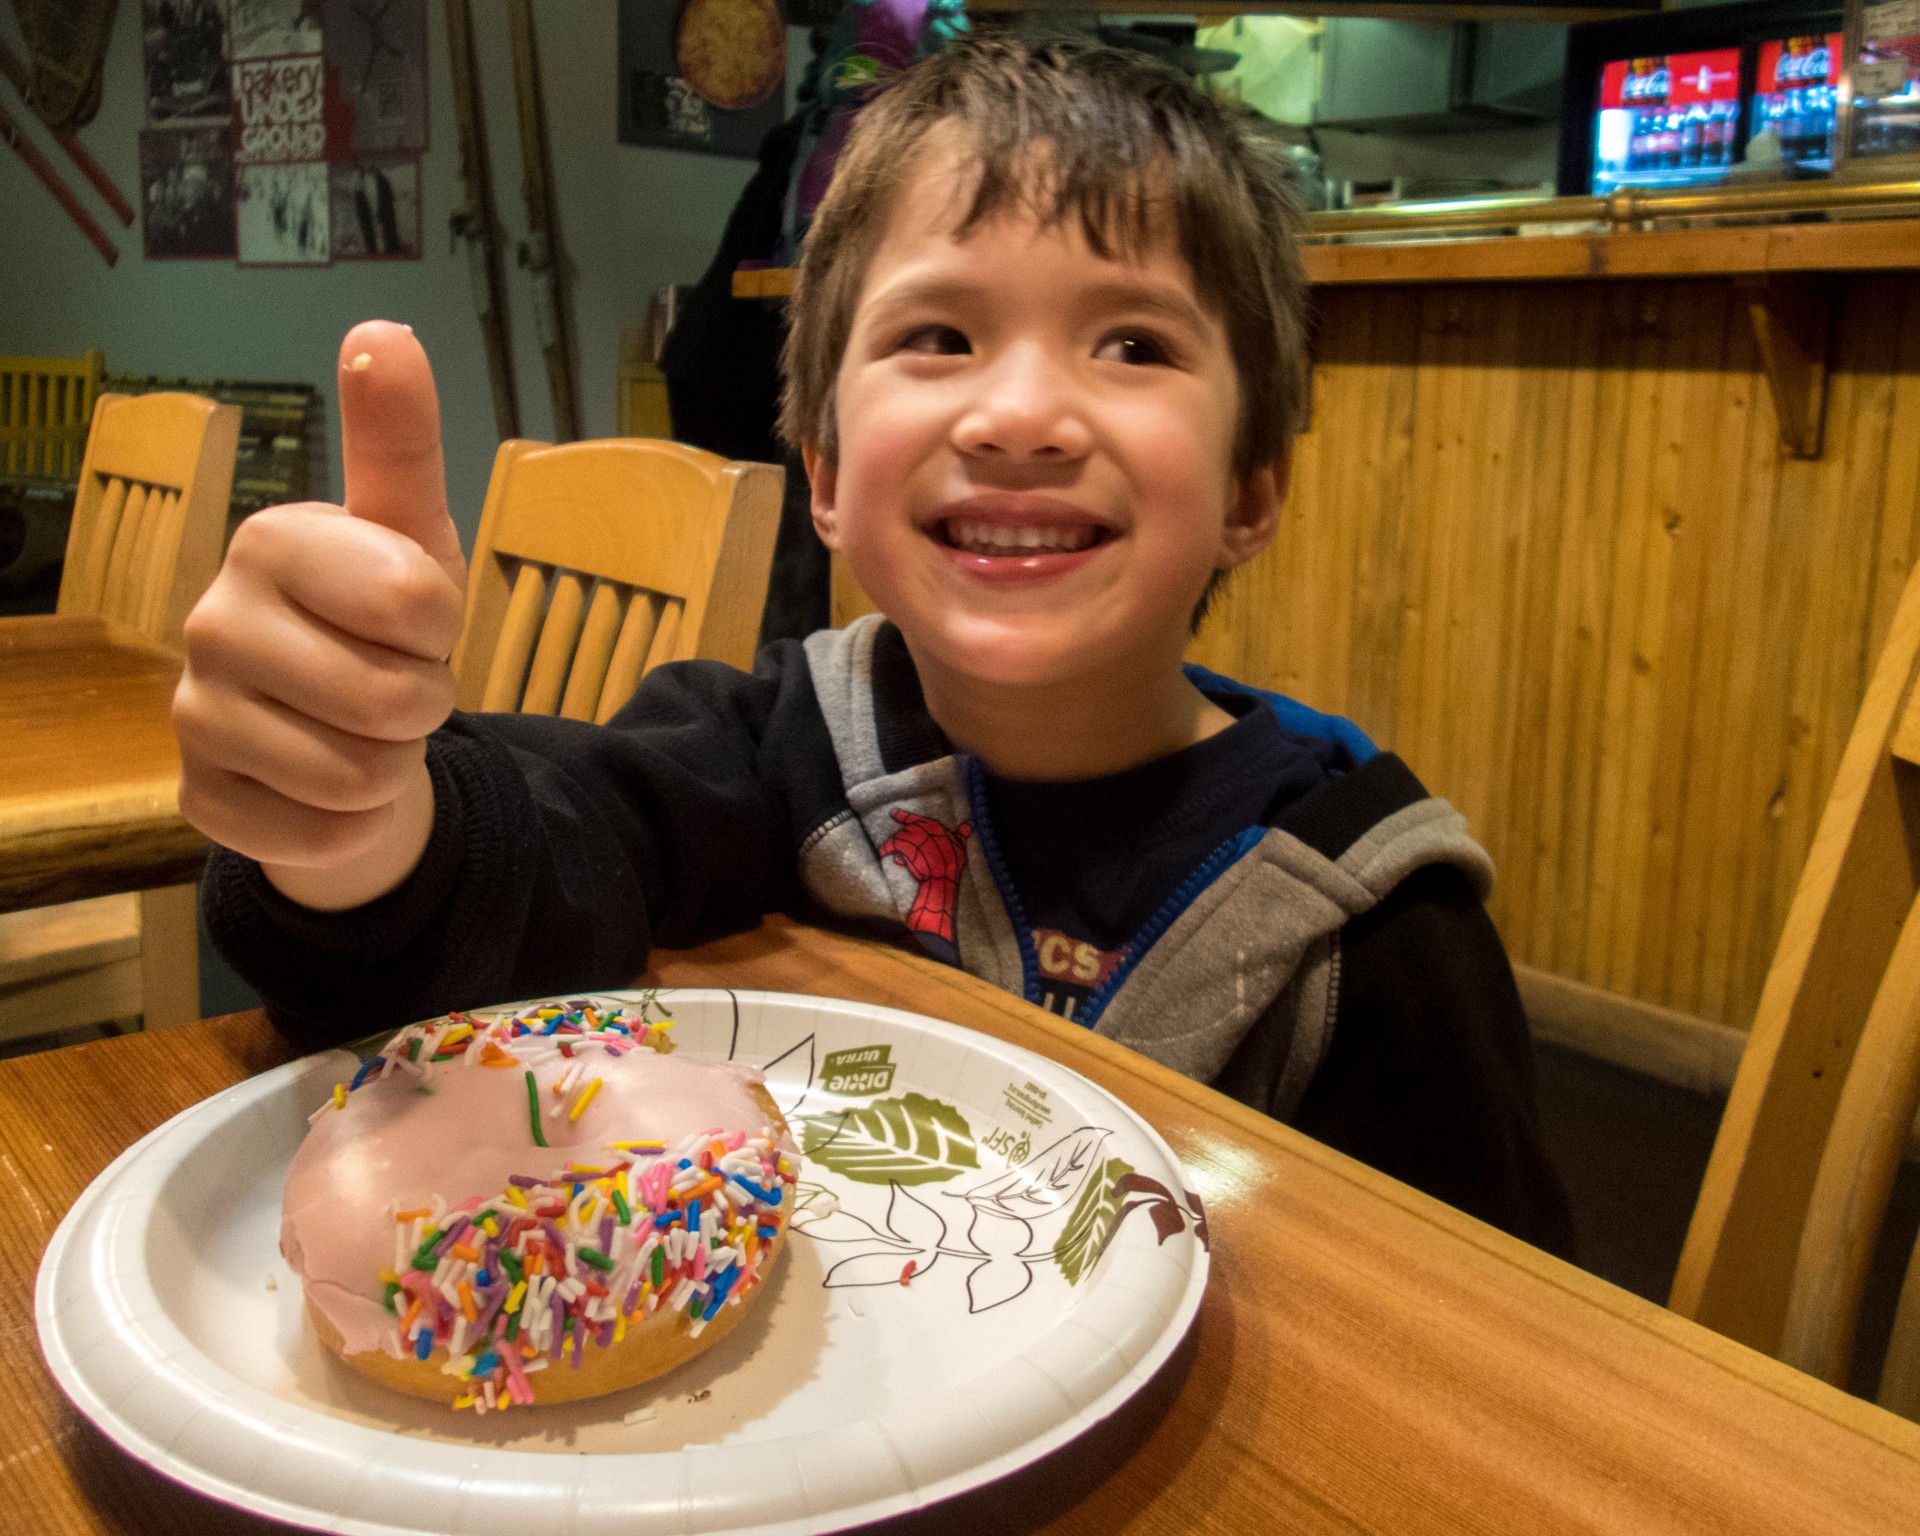 Young boy eating a donut gives a thumbs up - Learning to ski at Kelowna's Big White